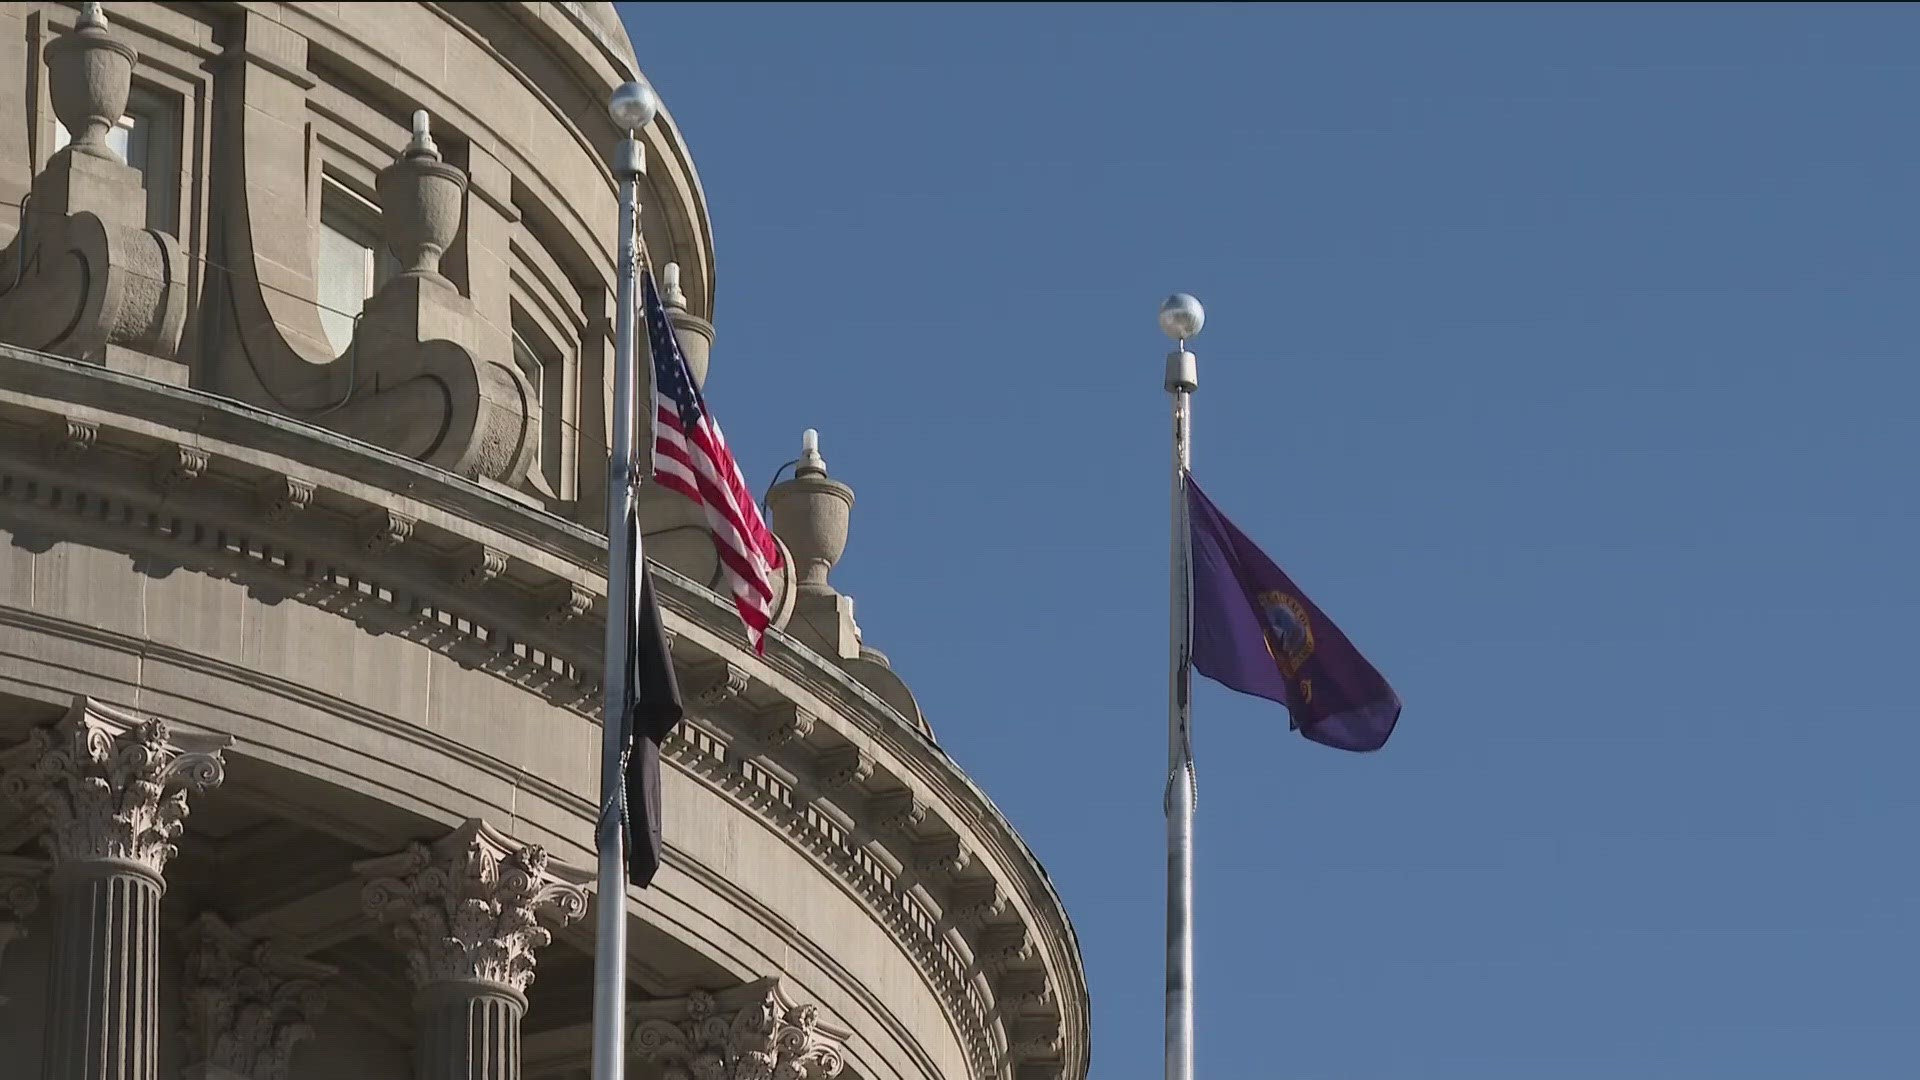 Flag ban doesn't fly at the Idaho legislature, the bill did not garner the votes to pass.